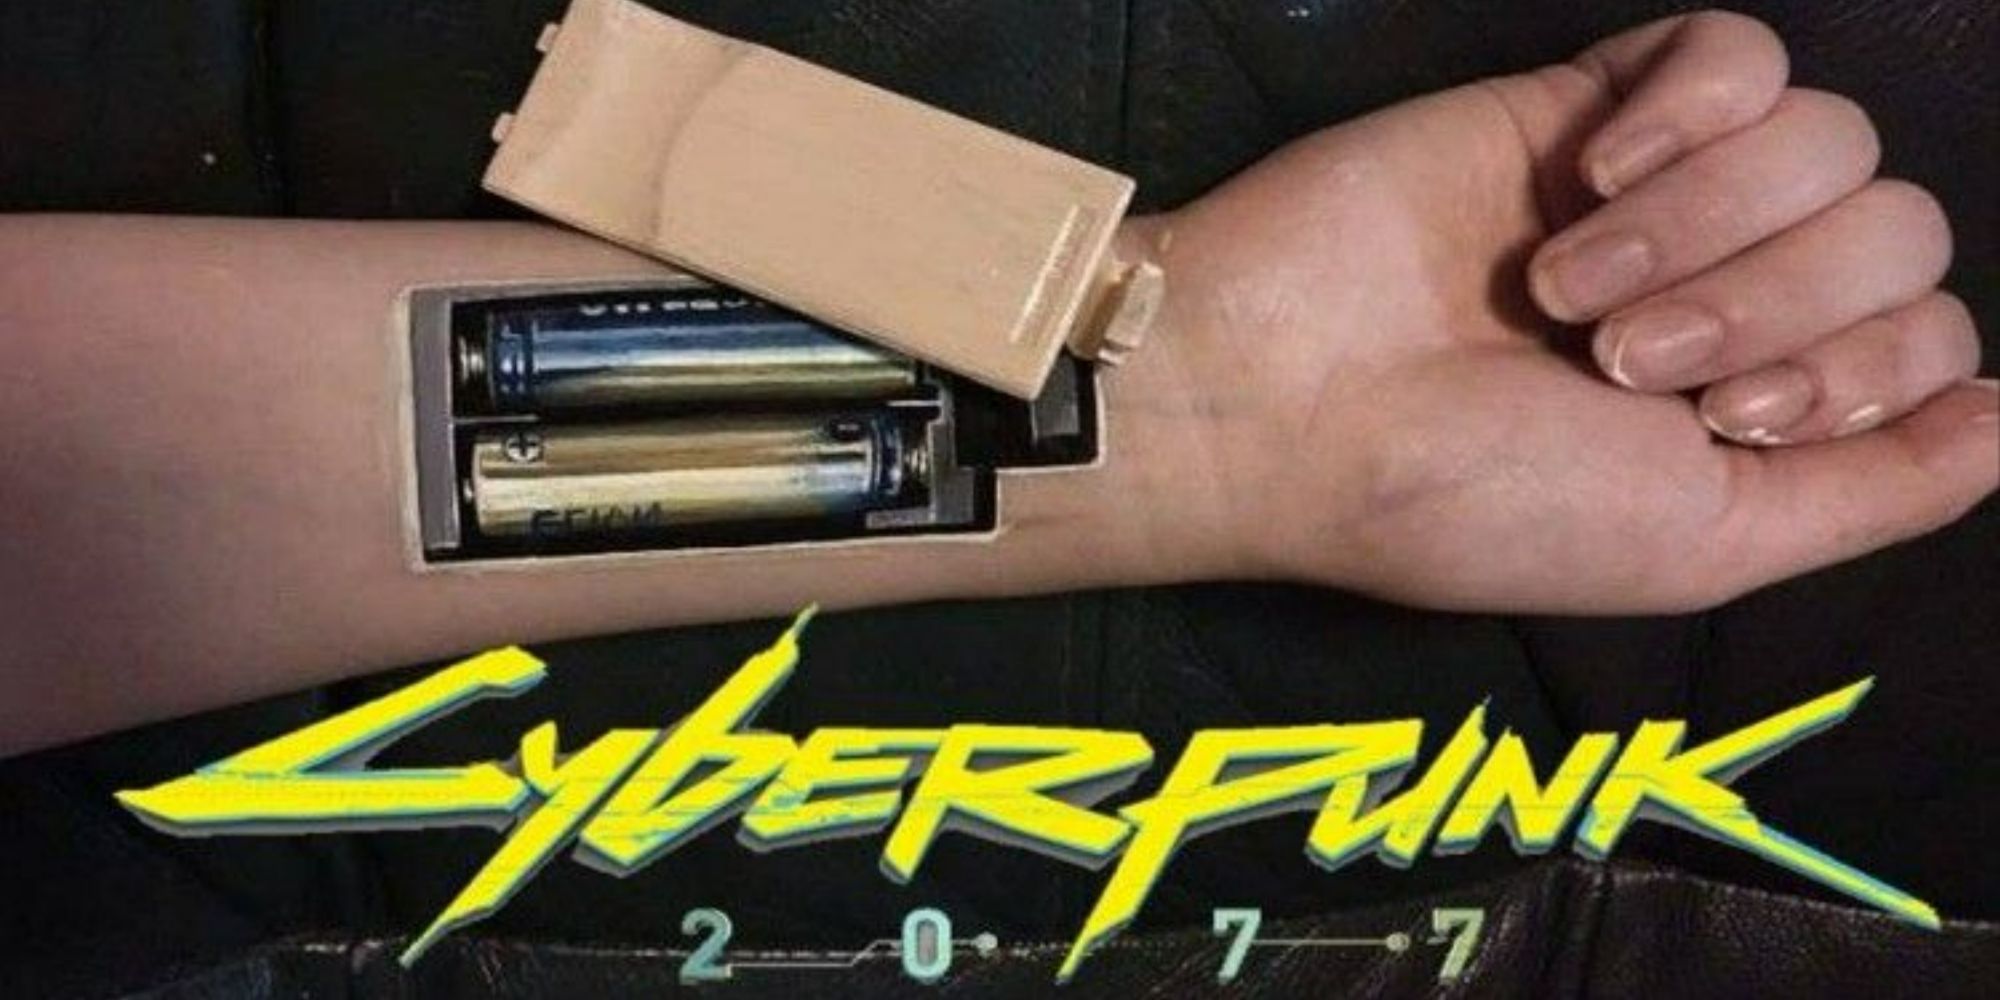 The Funniest Cyberpunk 2077 Memes and the Newest Expansion